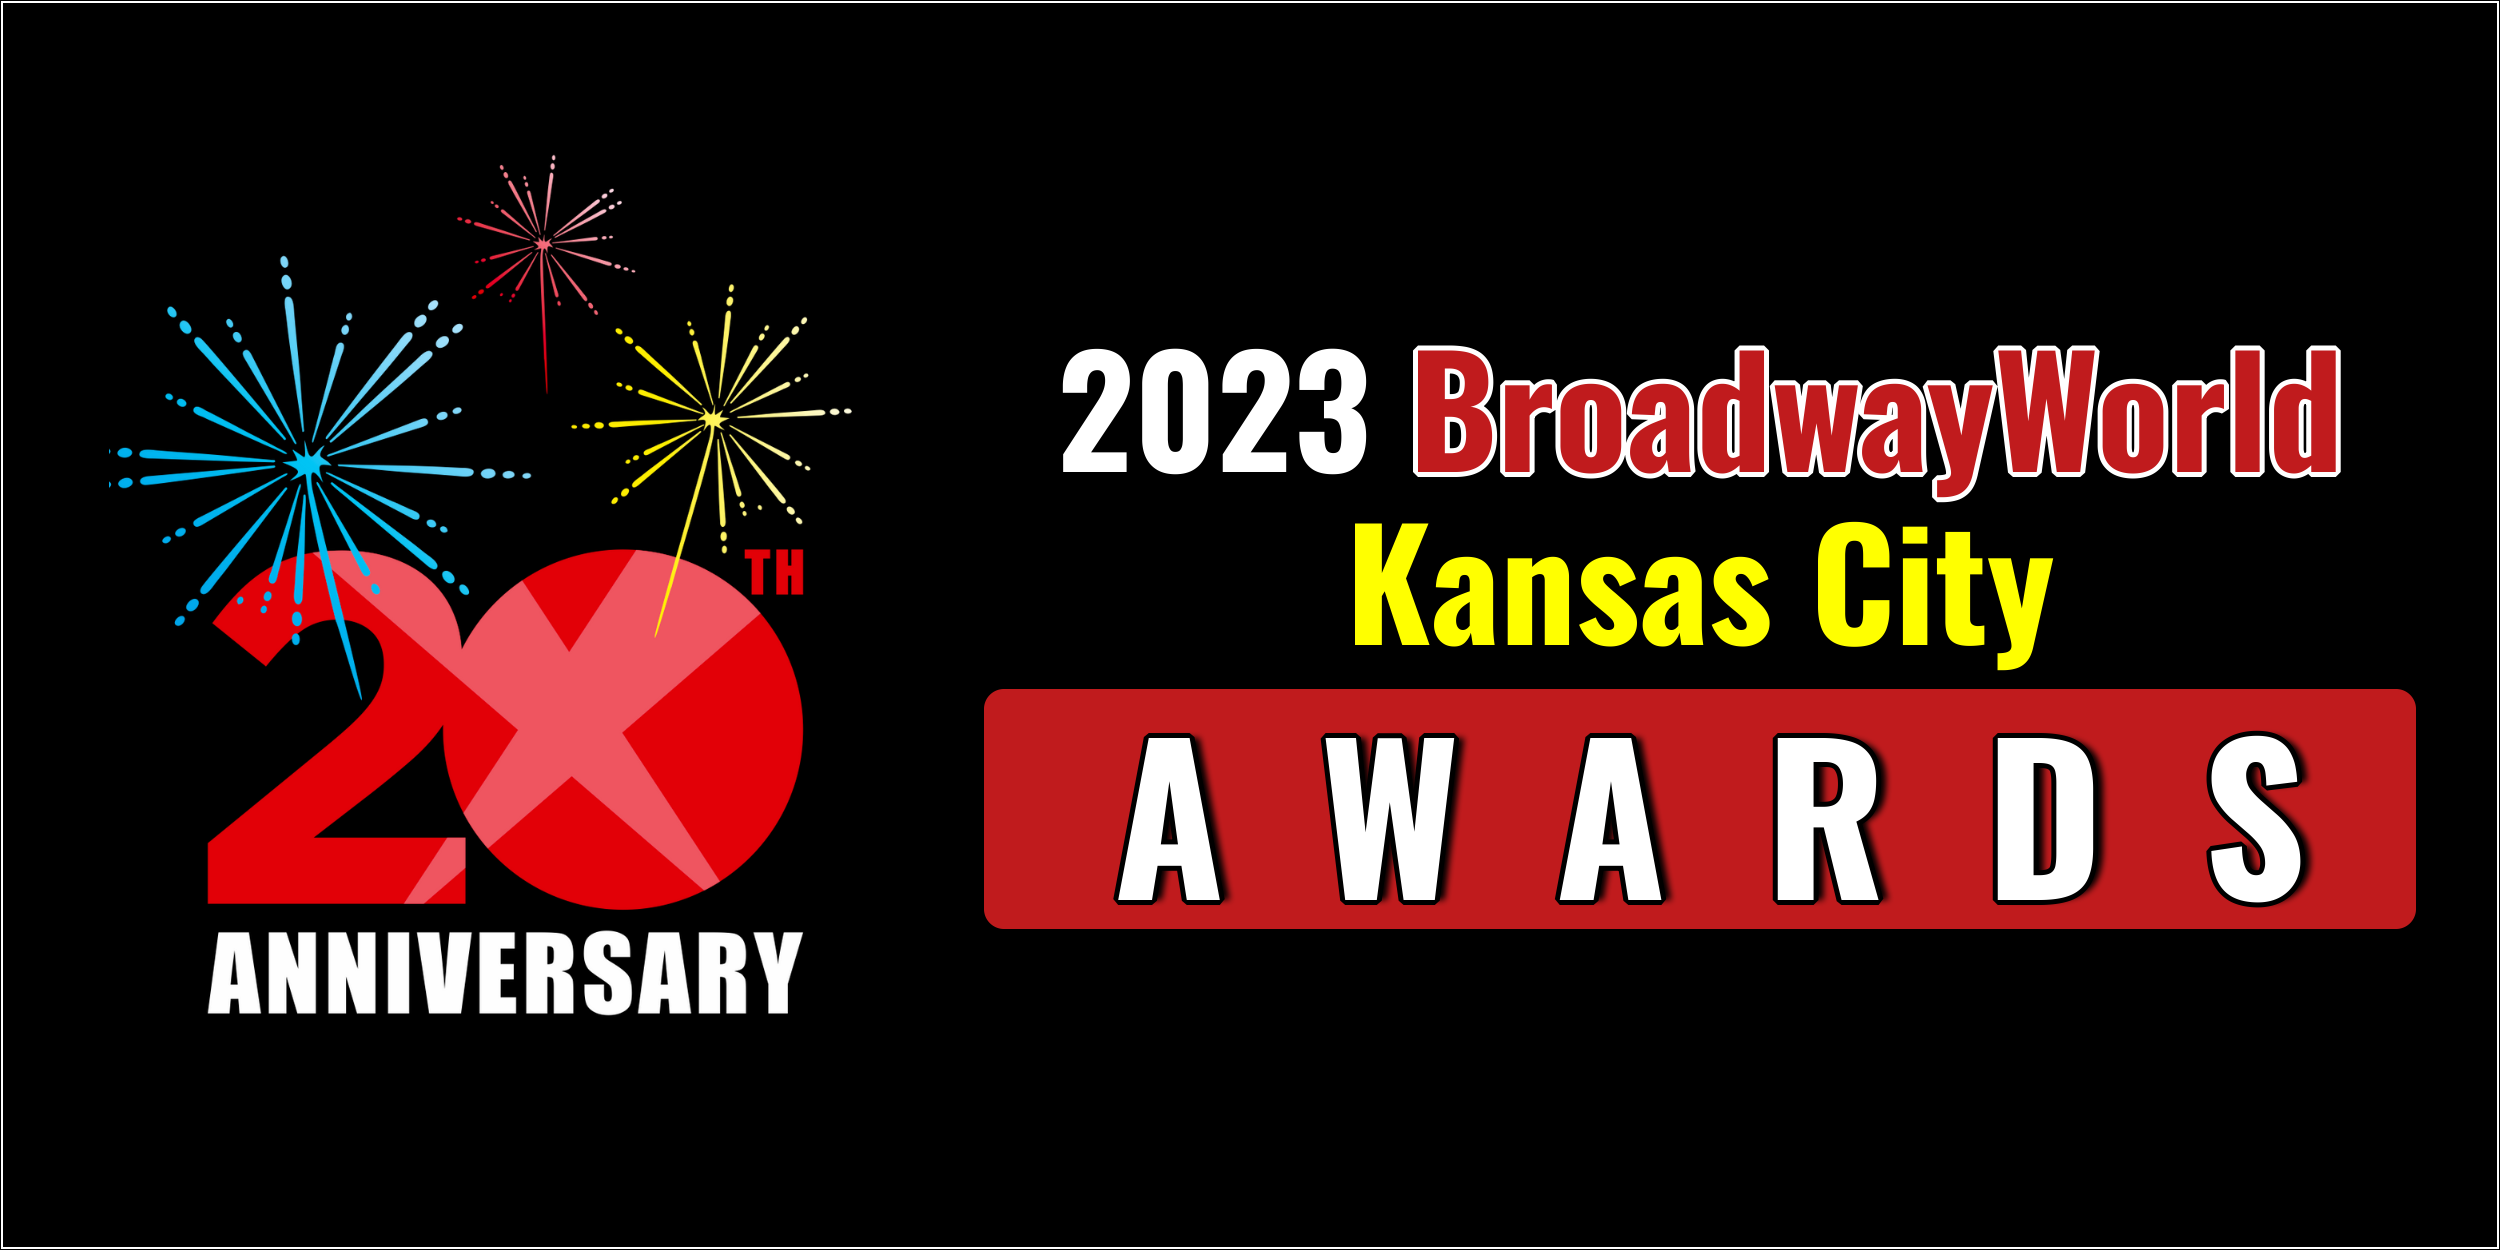 Latest Standings Announced For The 2023 BroadwayWorld Kansas City Awards;  Leads Favorite Local Theatre! 